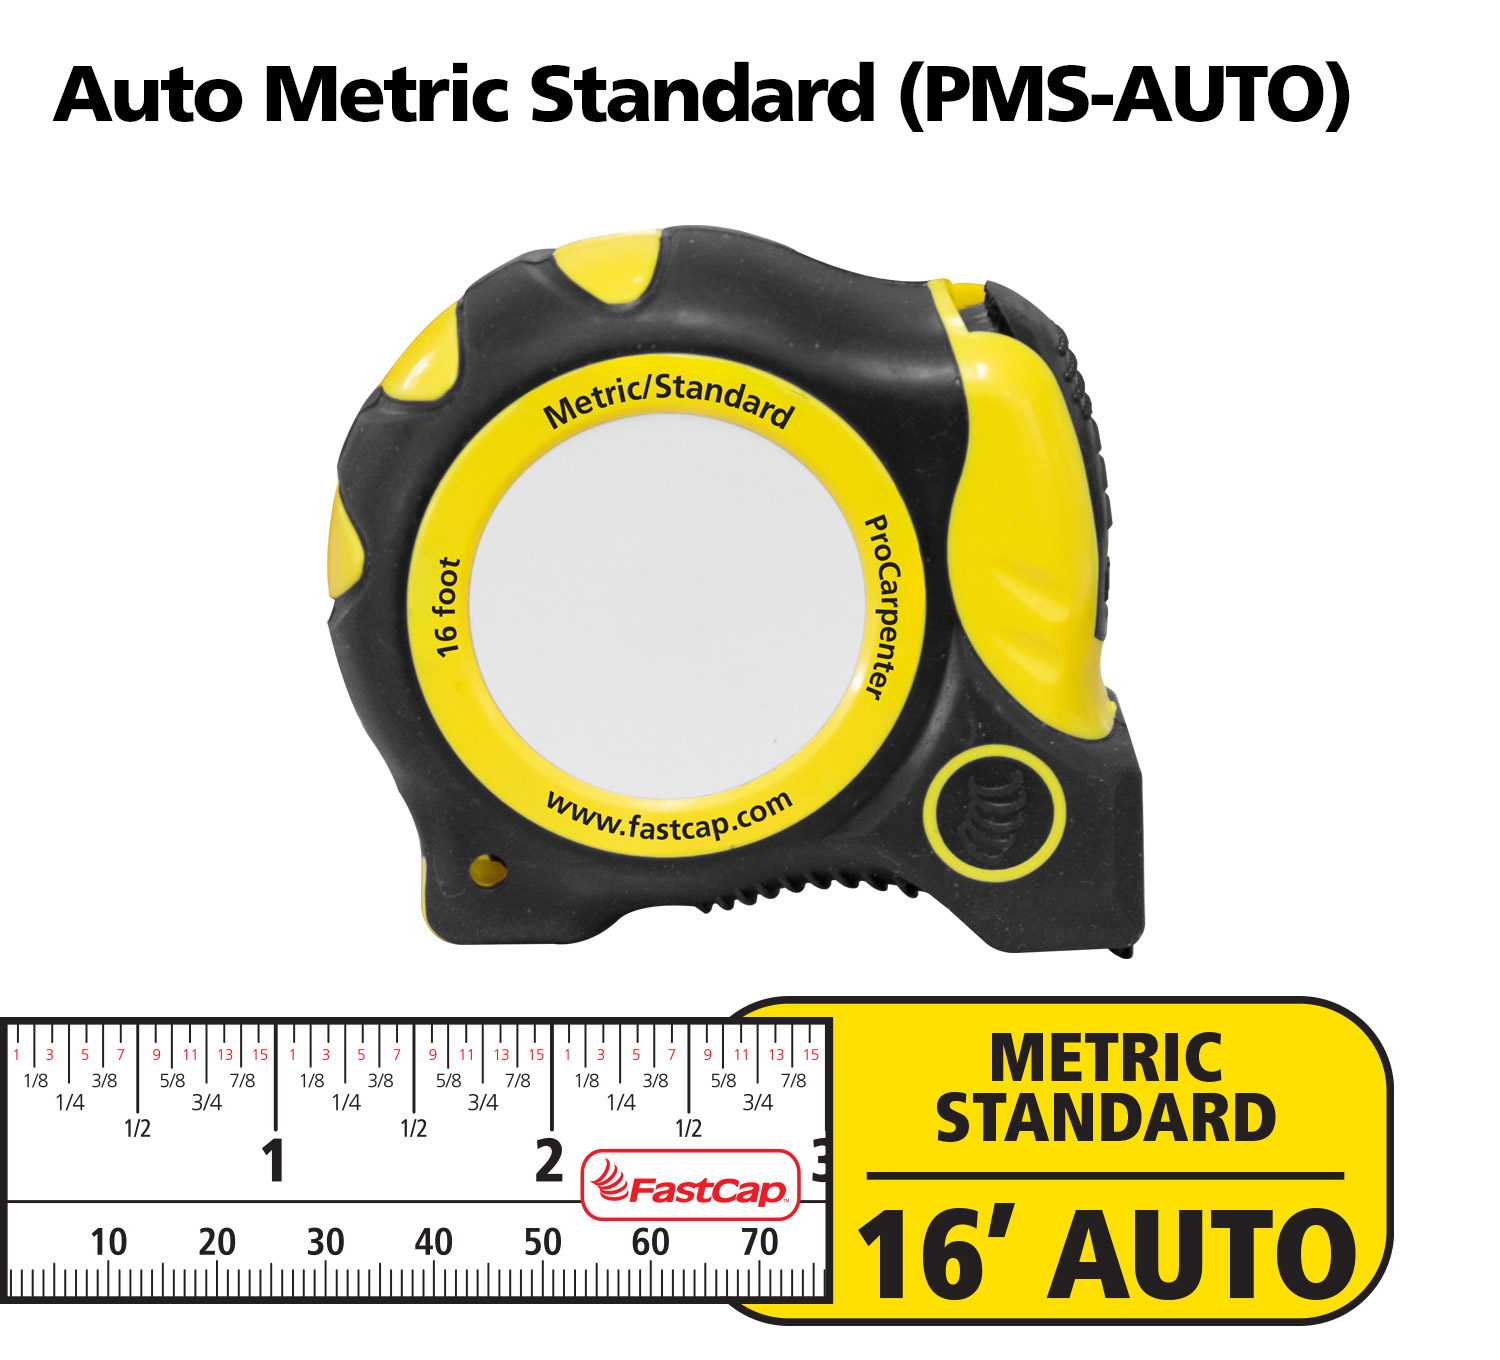  FastCap ProCarpenter True32 Metric Reverse Measuring Tape -  Ideal for Professionals and Home Improvement - with Lever Action Belt Clip  and Dual Locking System - 16' - 99953 : Tools & Home Improvement